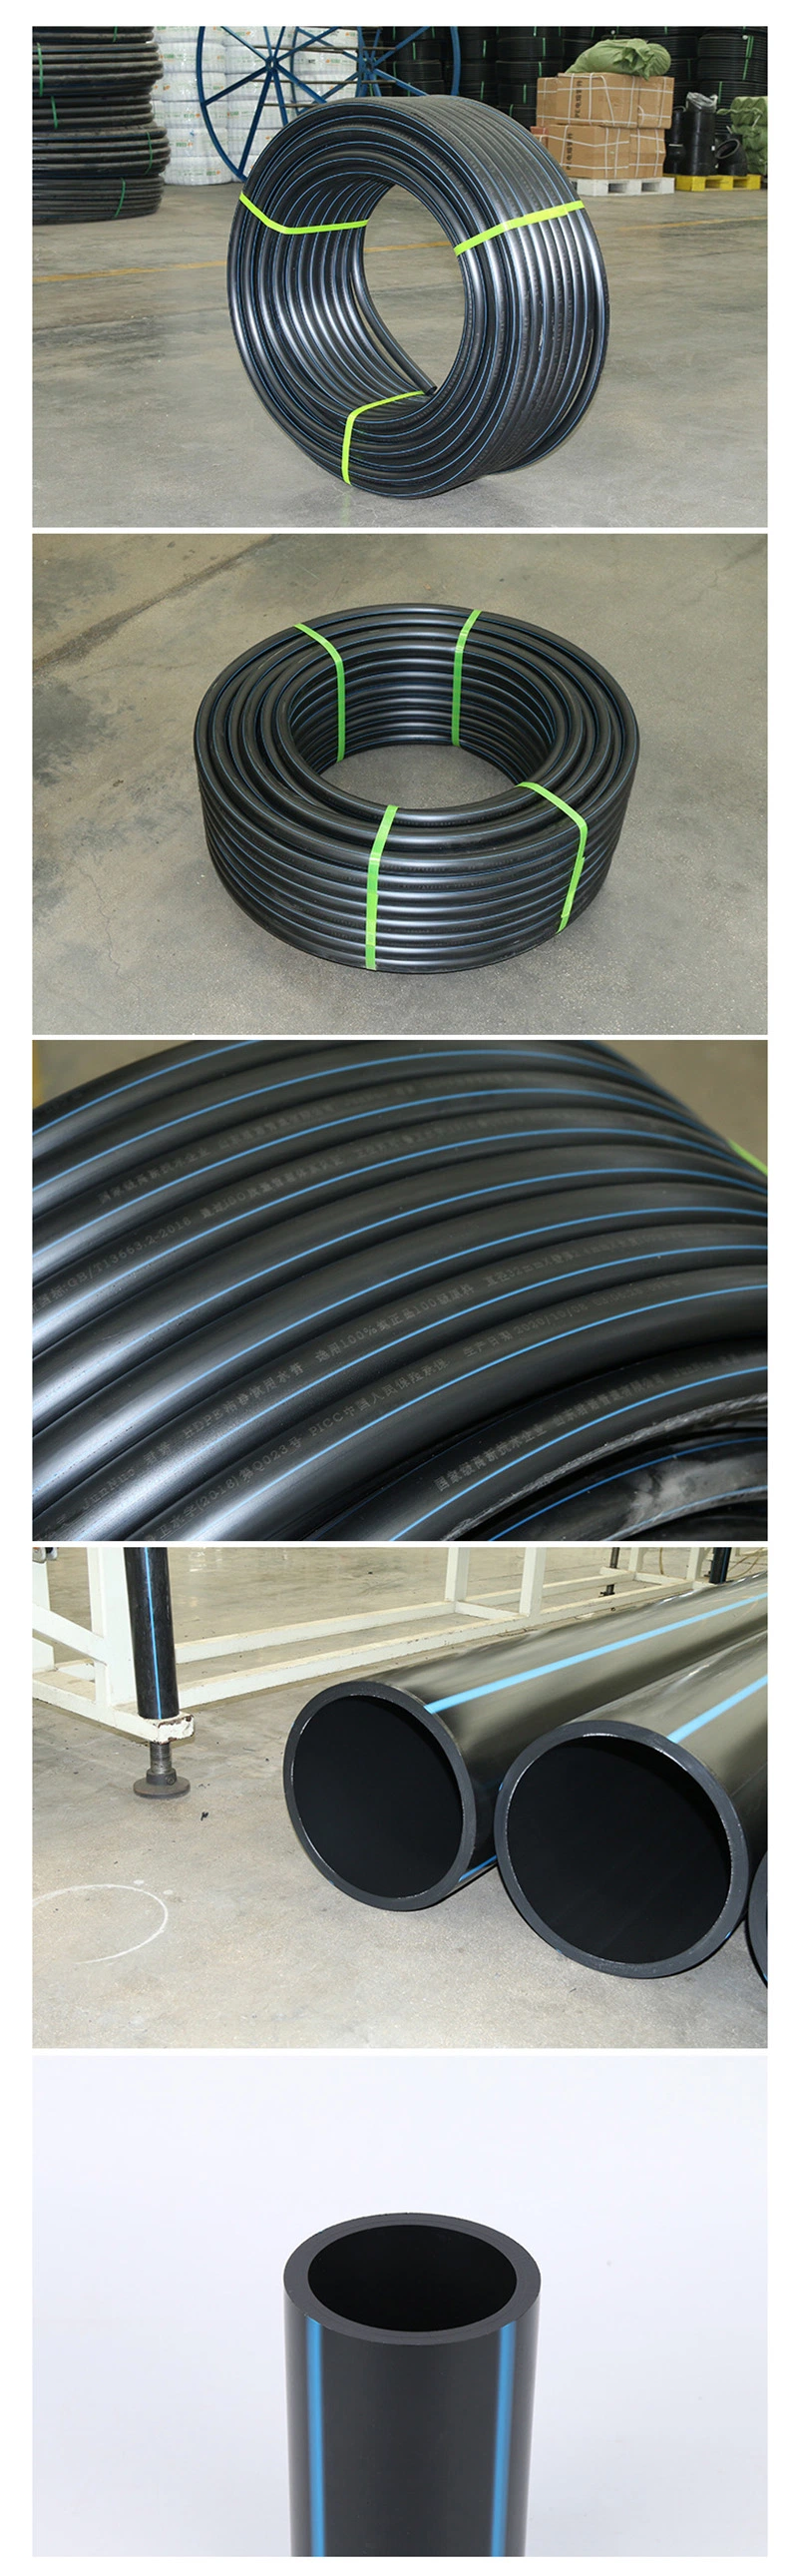 Plastic PE Pipes 400mm 500mm 630mm PE100 SDR11 Pn16 Factory Prices Hose HDPE Pipe for Water Supply